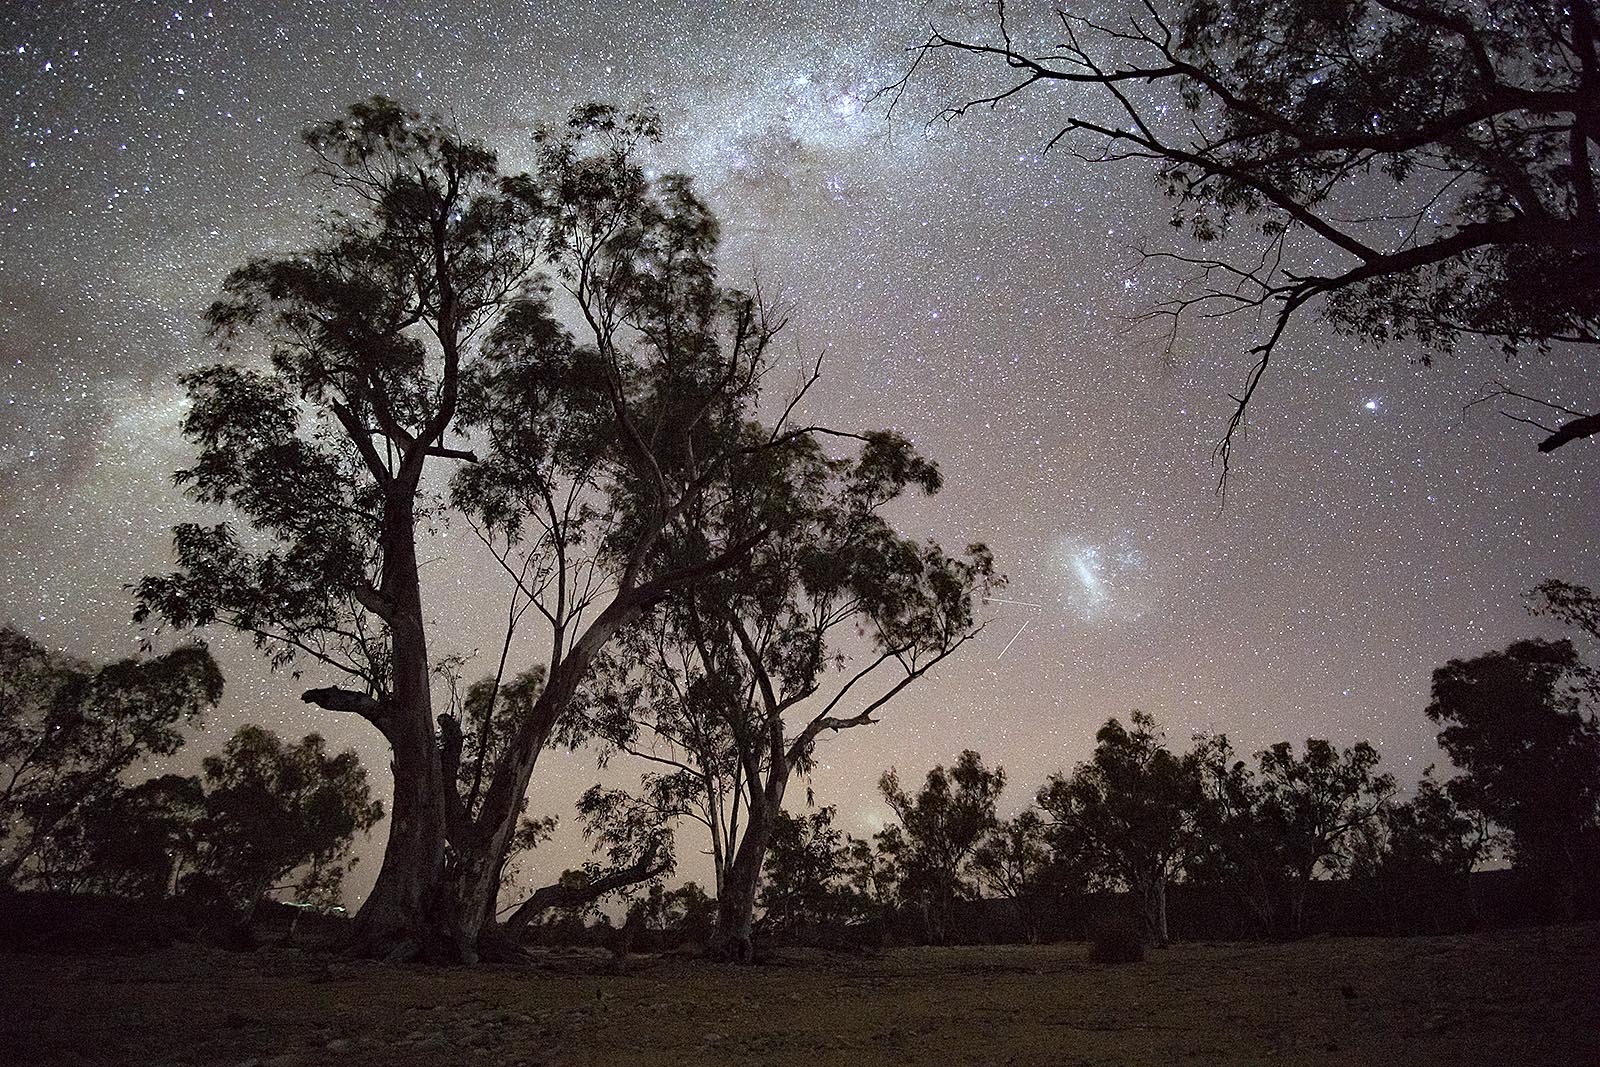 Milky Way from the Larapinta Trail over the Finke River in the Northern Territory of Australia. OrangeBrown